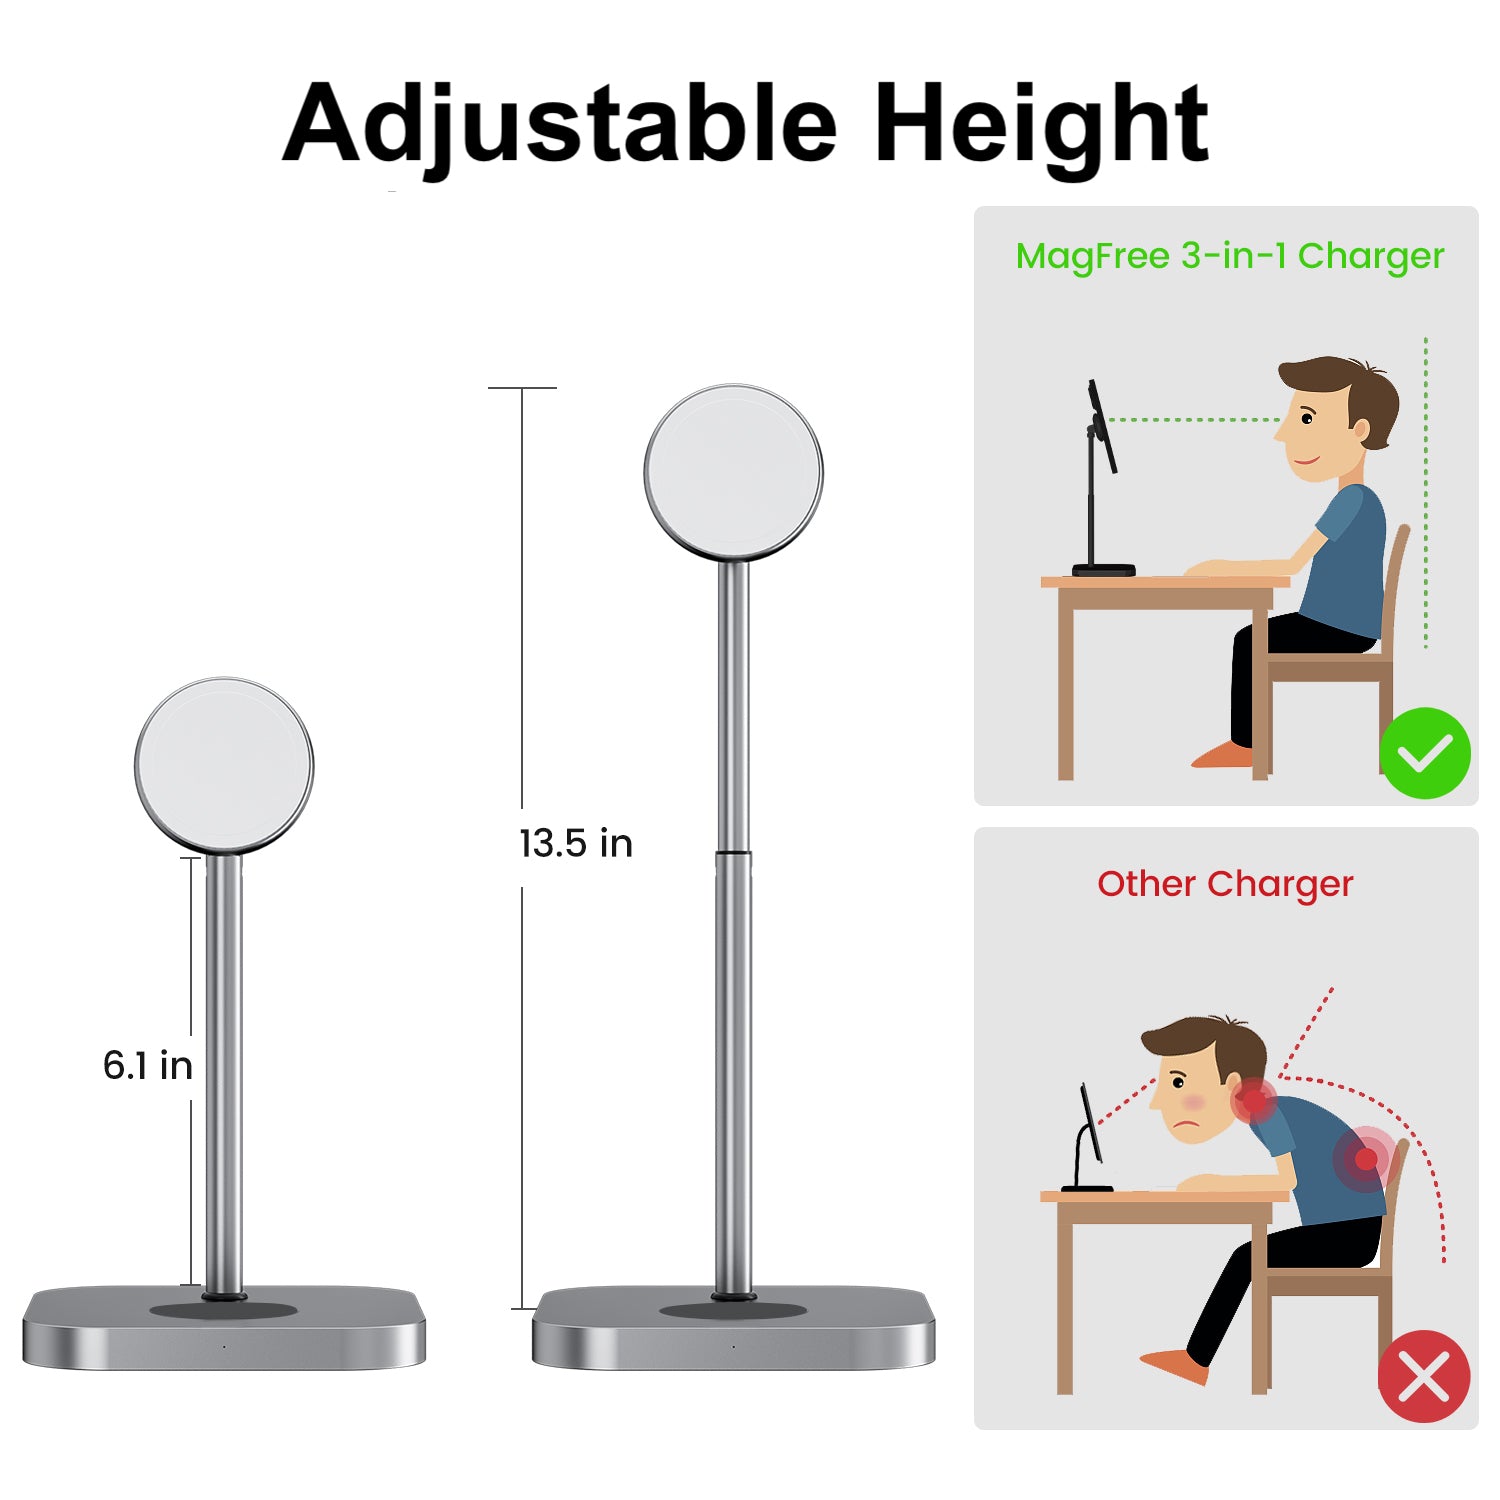 MagFree Elevate: The Height-Adjustable 3-in-1 Wireless Charging Statio